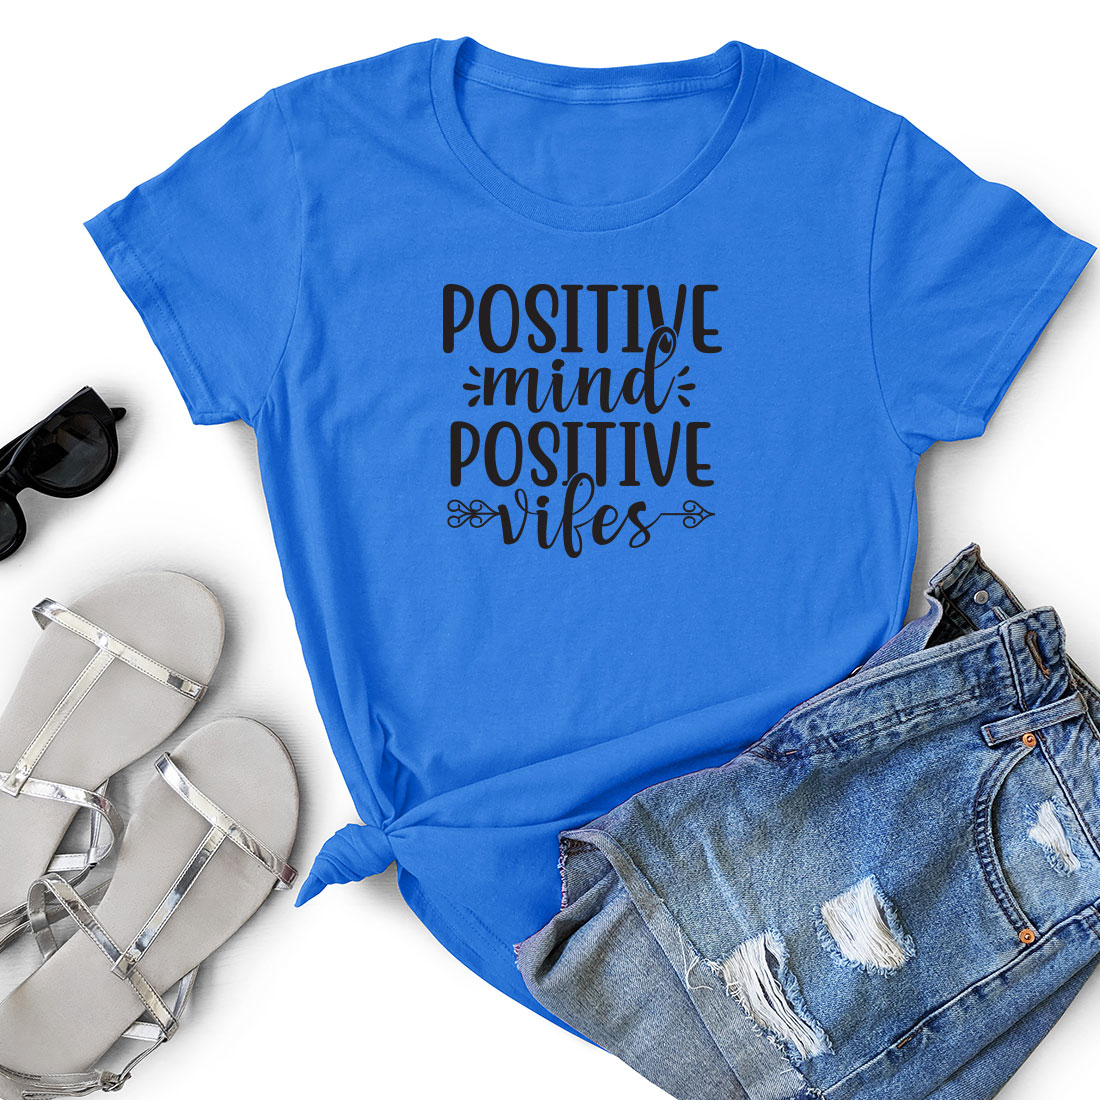 T - shirt that says positive minds and a pair of shorts.